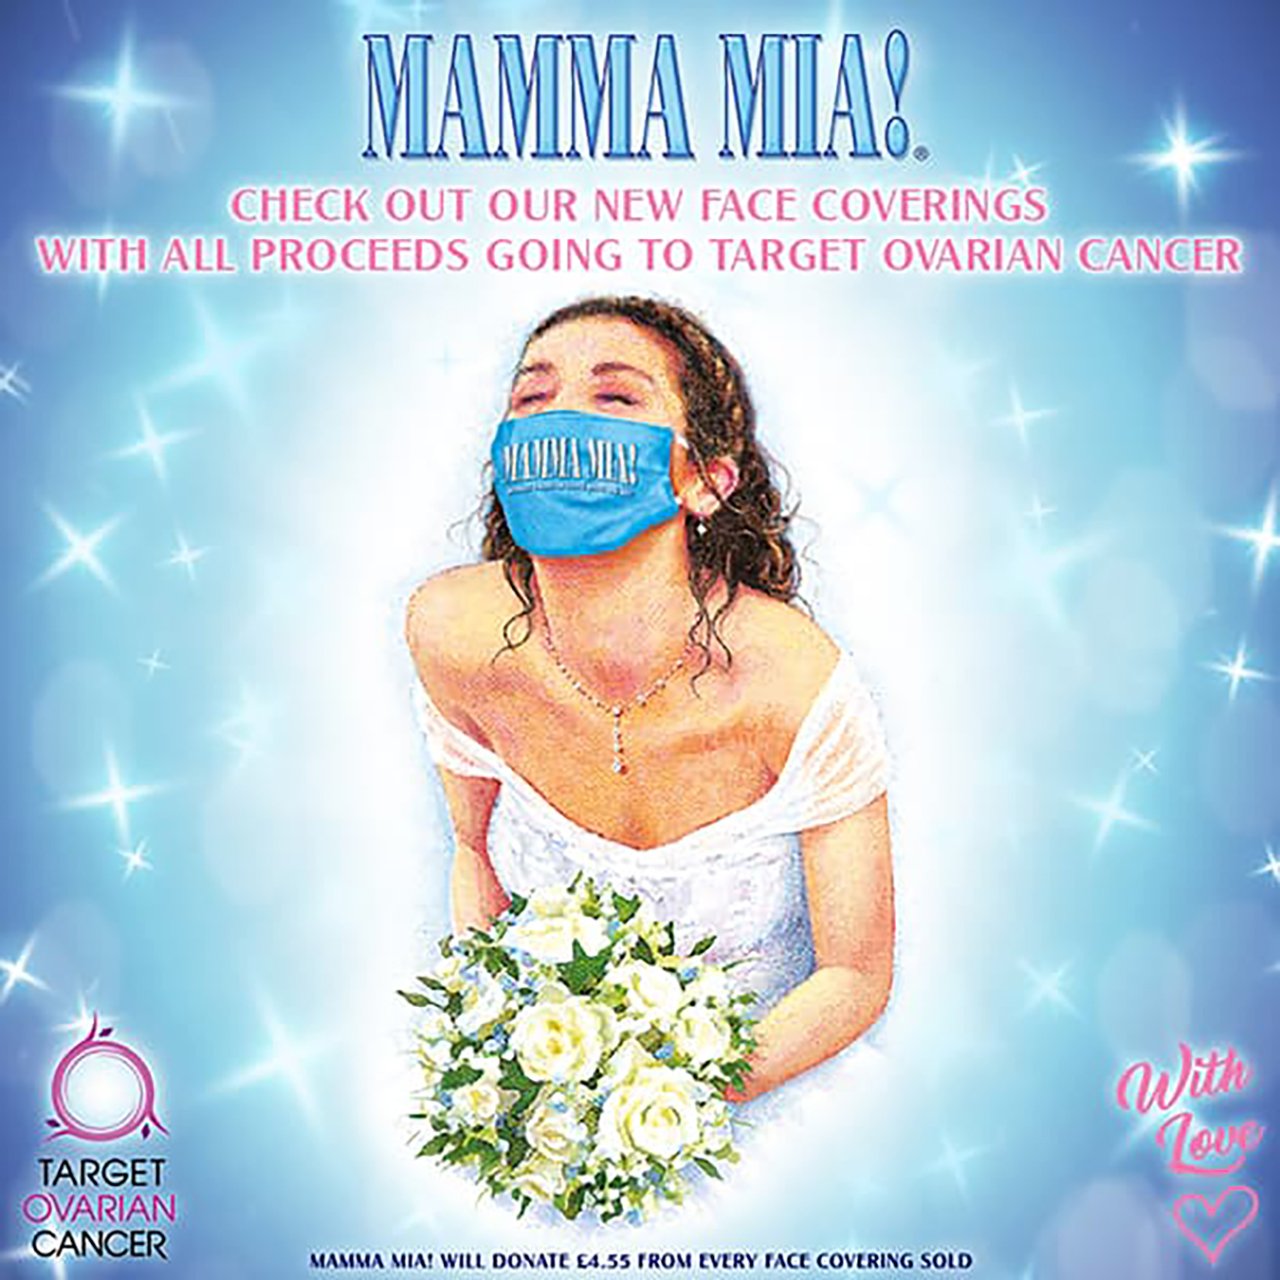 MAMMA MIA! AND OVARIAN CANCER AWARENESS MONTH